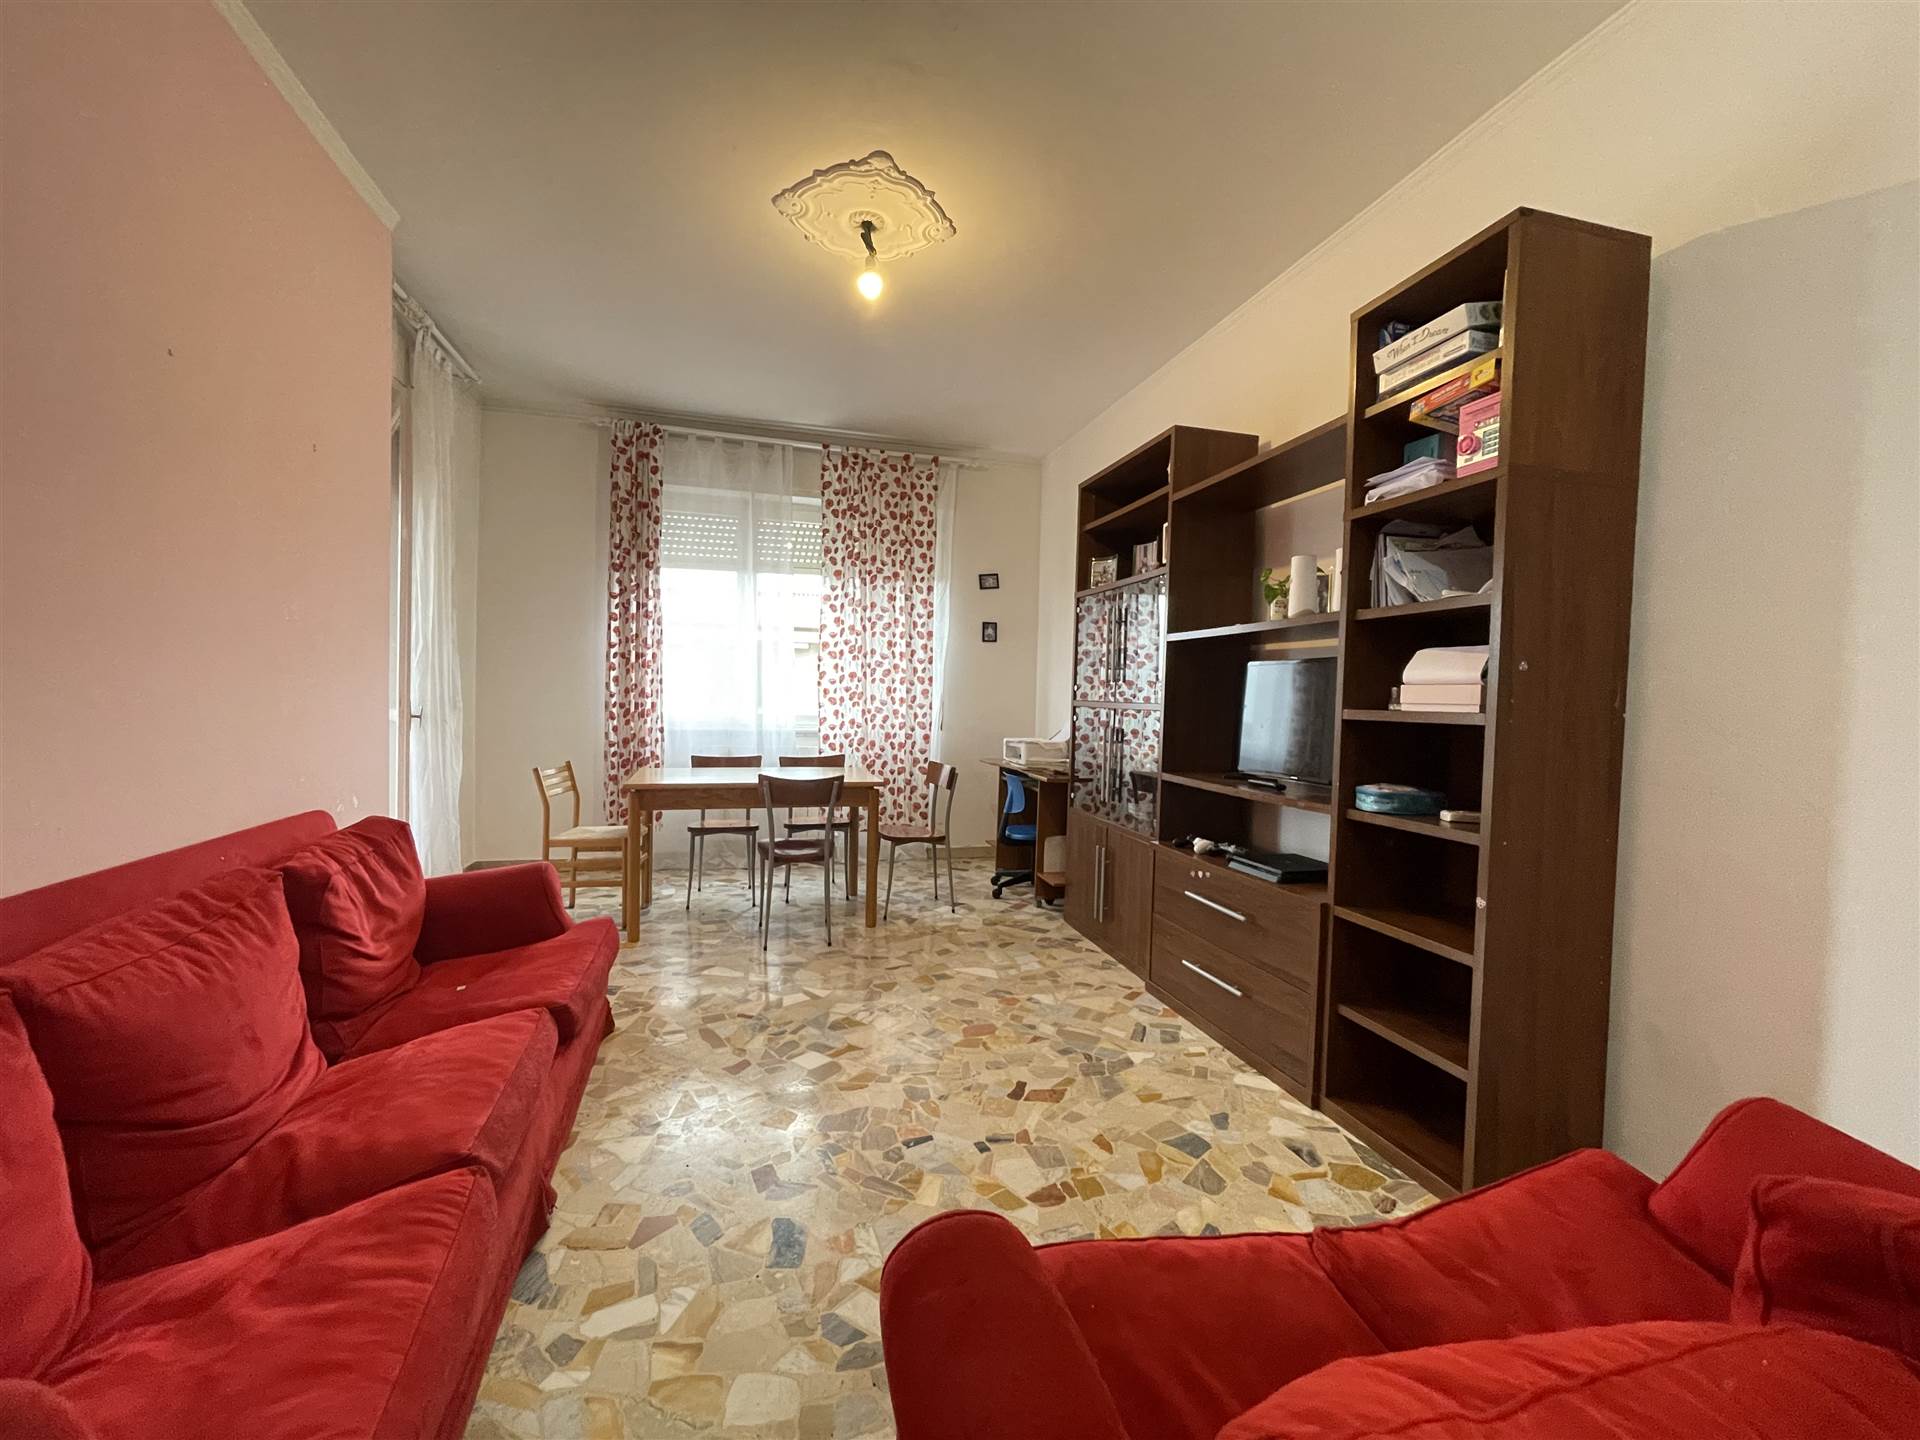 CASSANO D'ADDA, CASSANO D'ADDA, Apartment for sale of 90 Sq. mt., Habitable, Heating Centralized, Energetic class: G, Epi: 332,21 kwh/m2 year, 